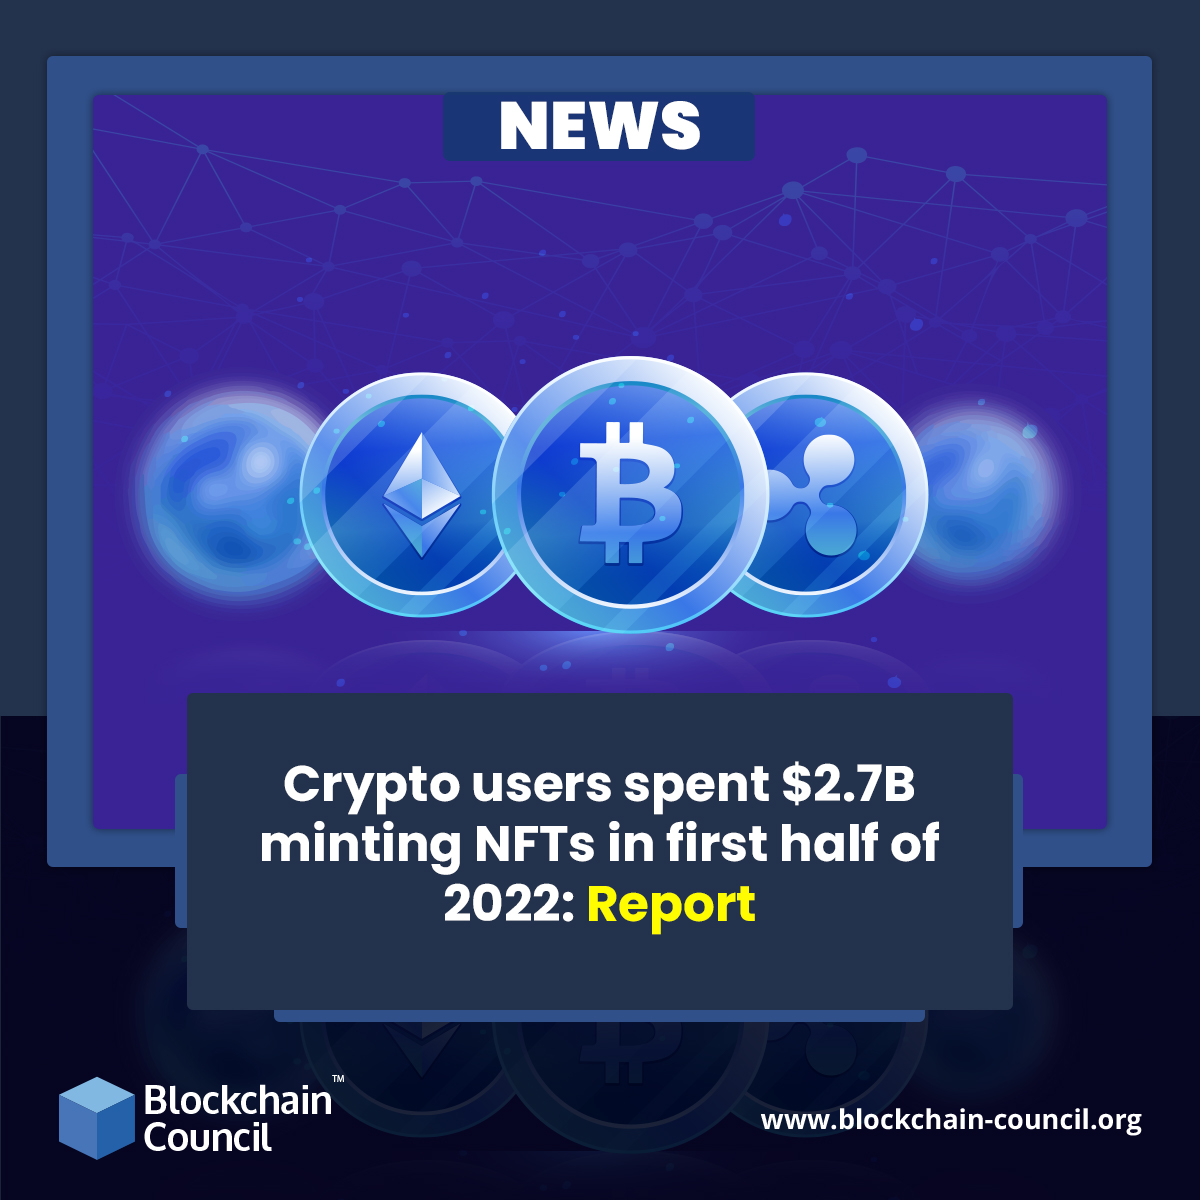 Crypto users spent $2.7B minting NFTs in first half of 2022: Report